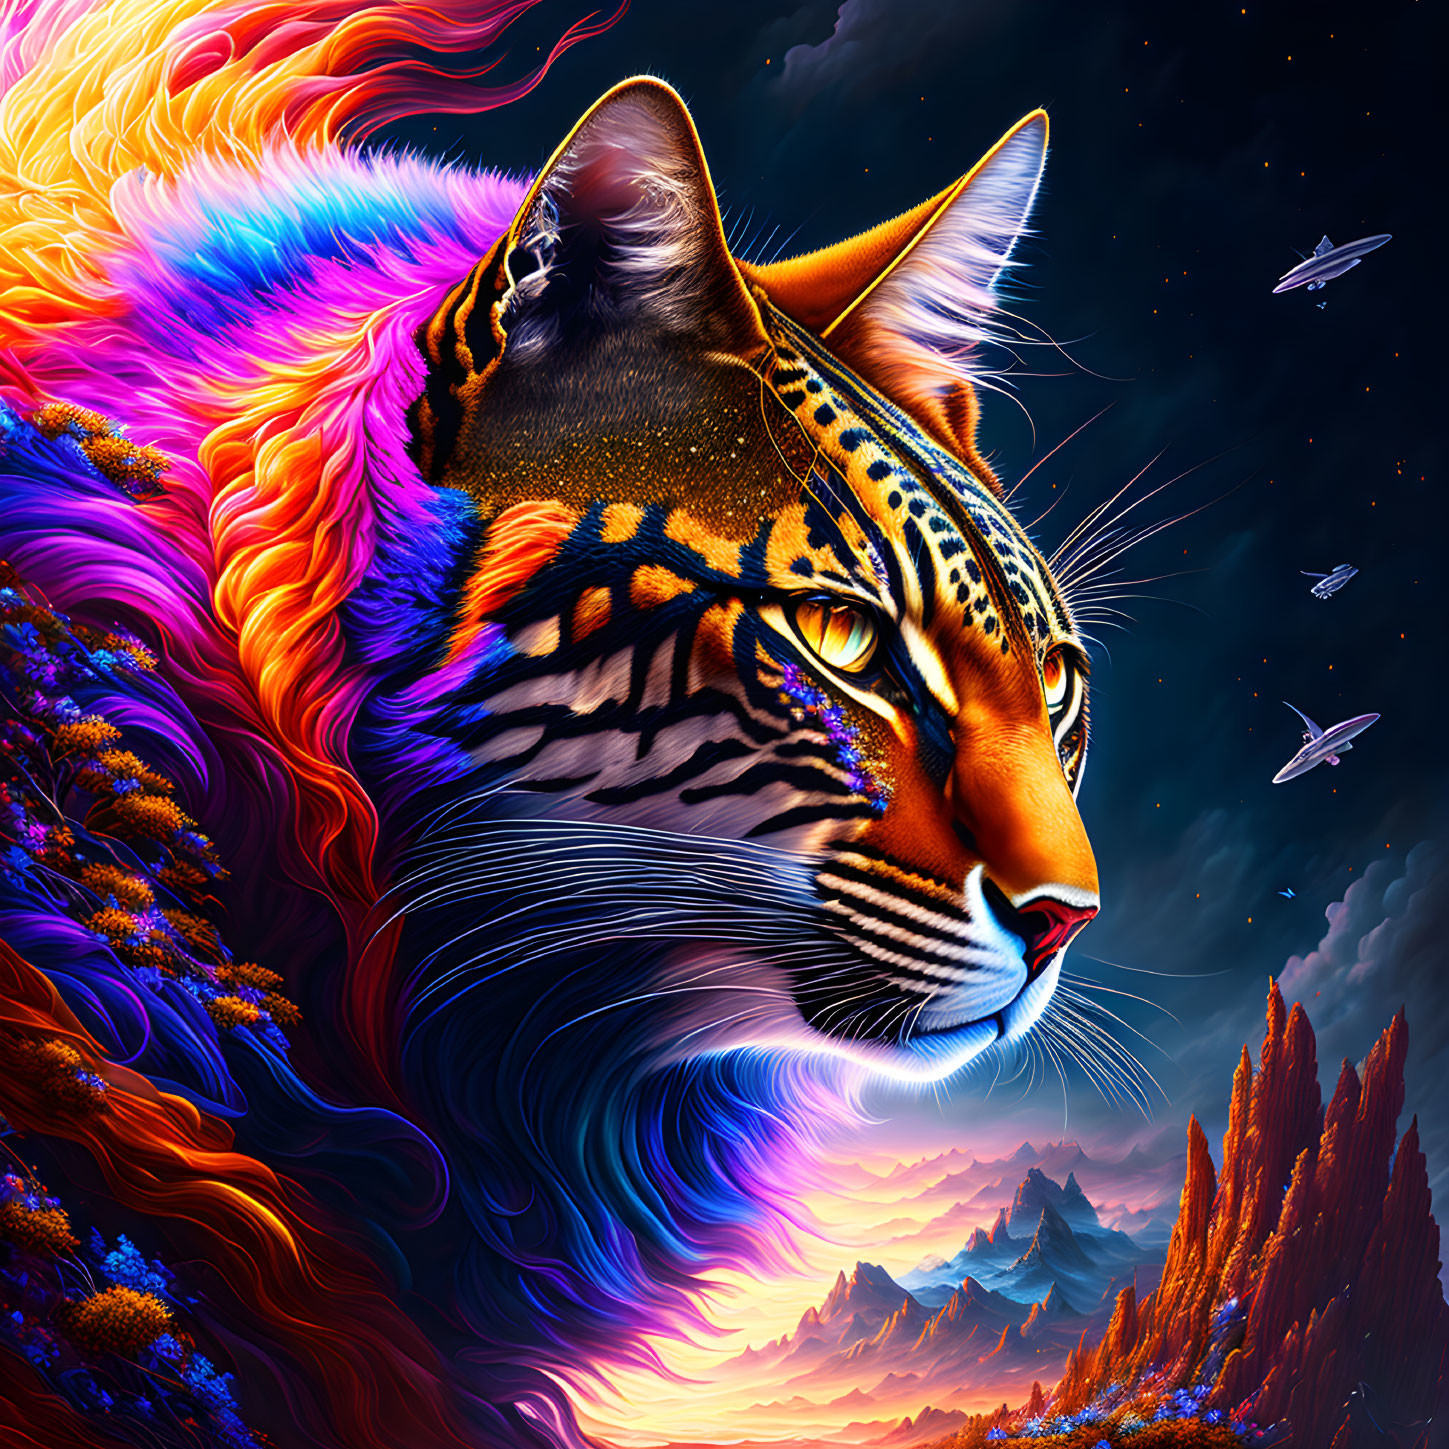 Colorful artwork: Majestic rainbow-hued cat in cosmic landscape with flying whales